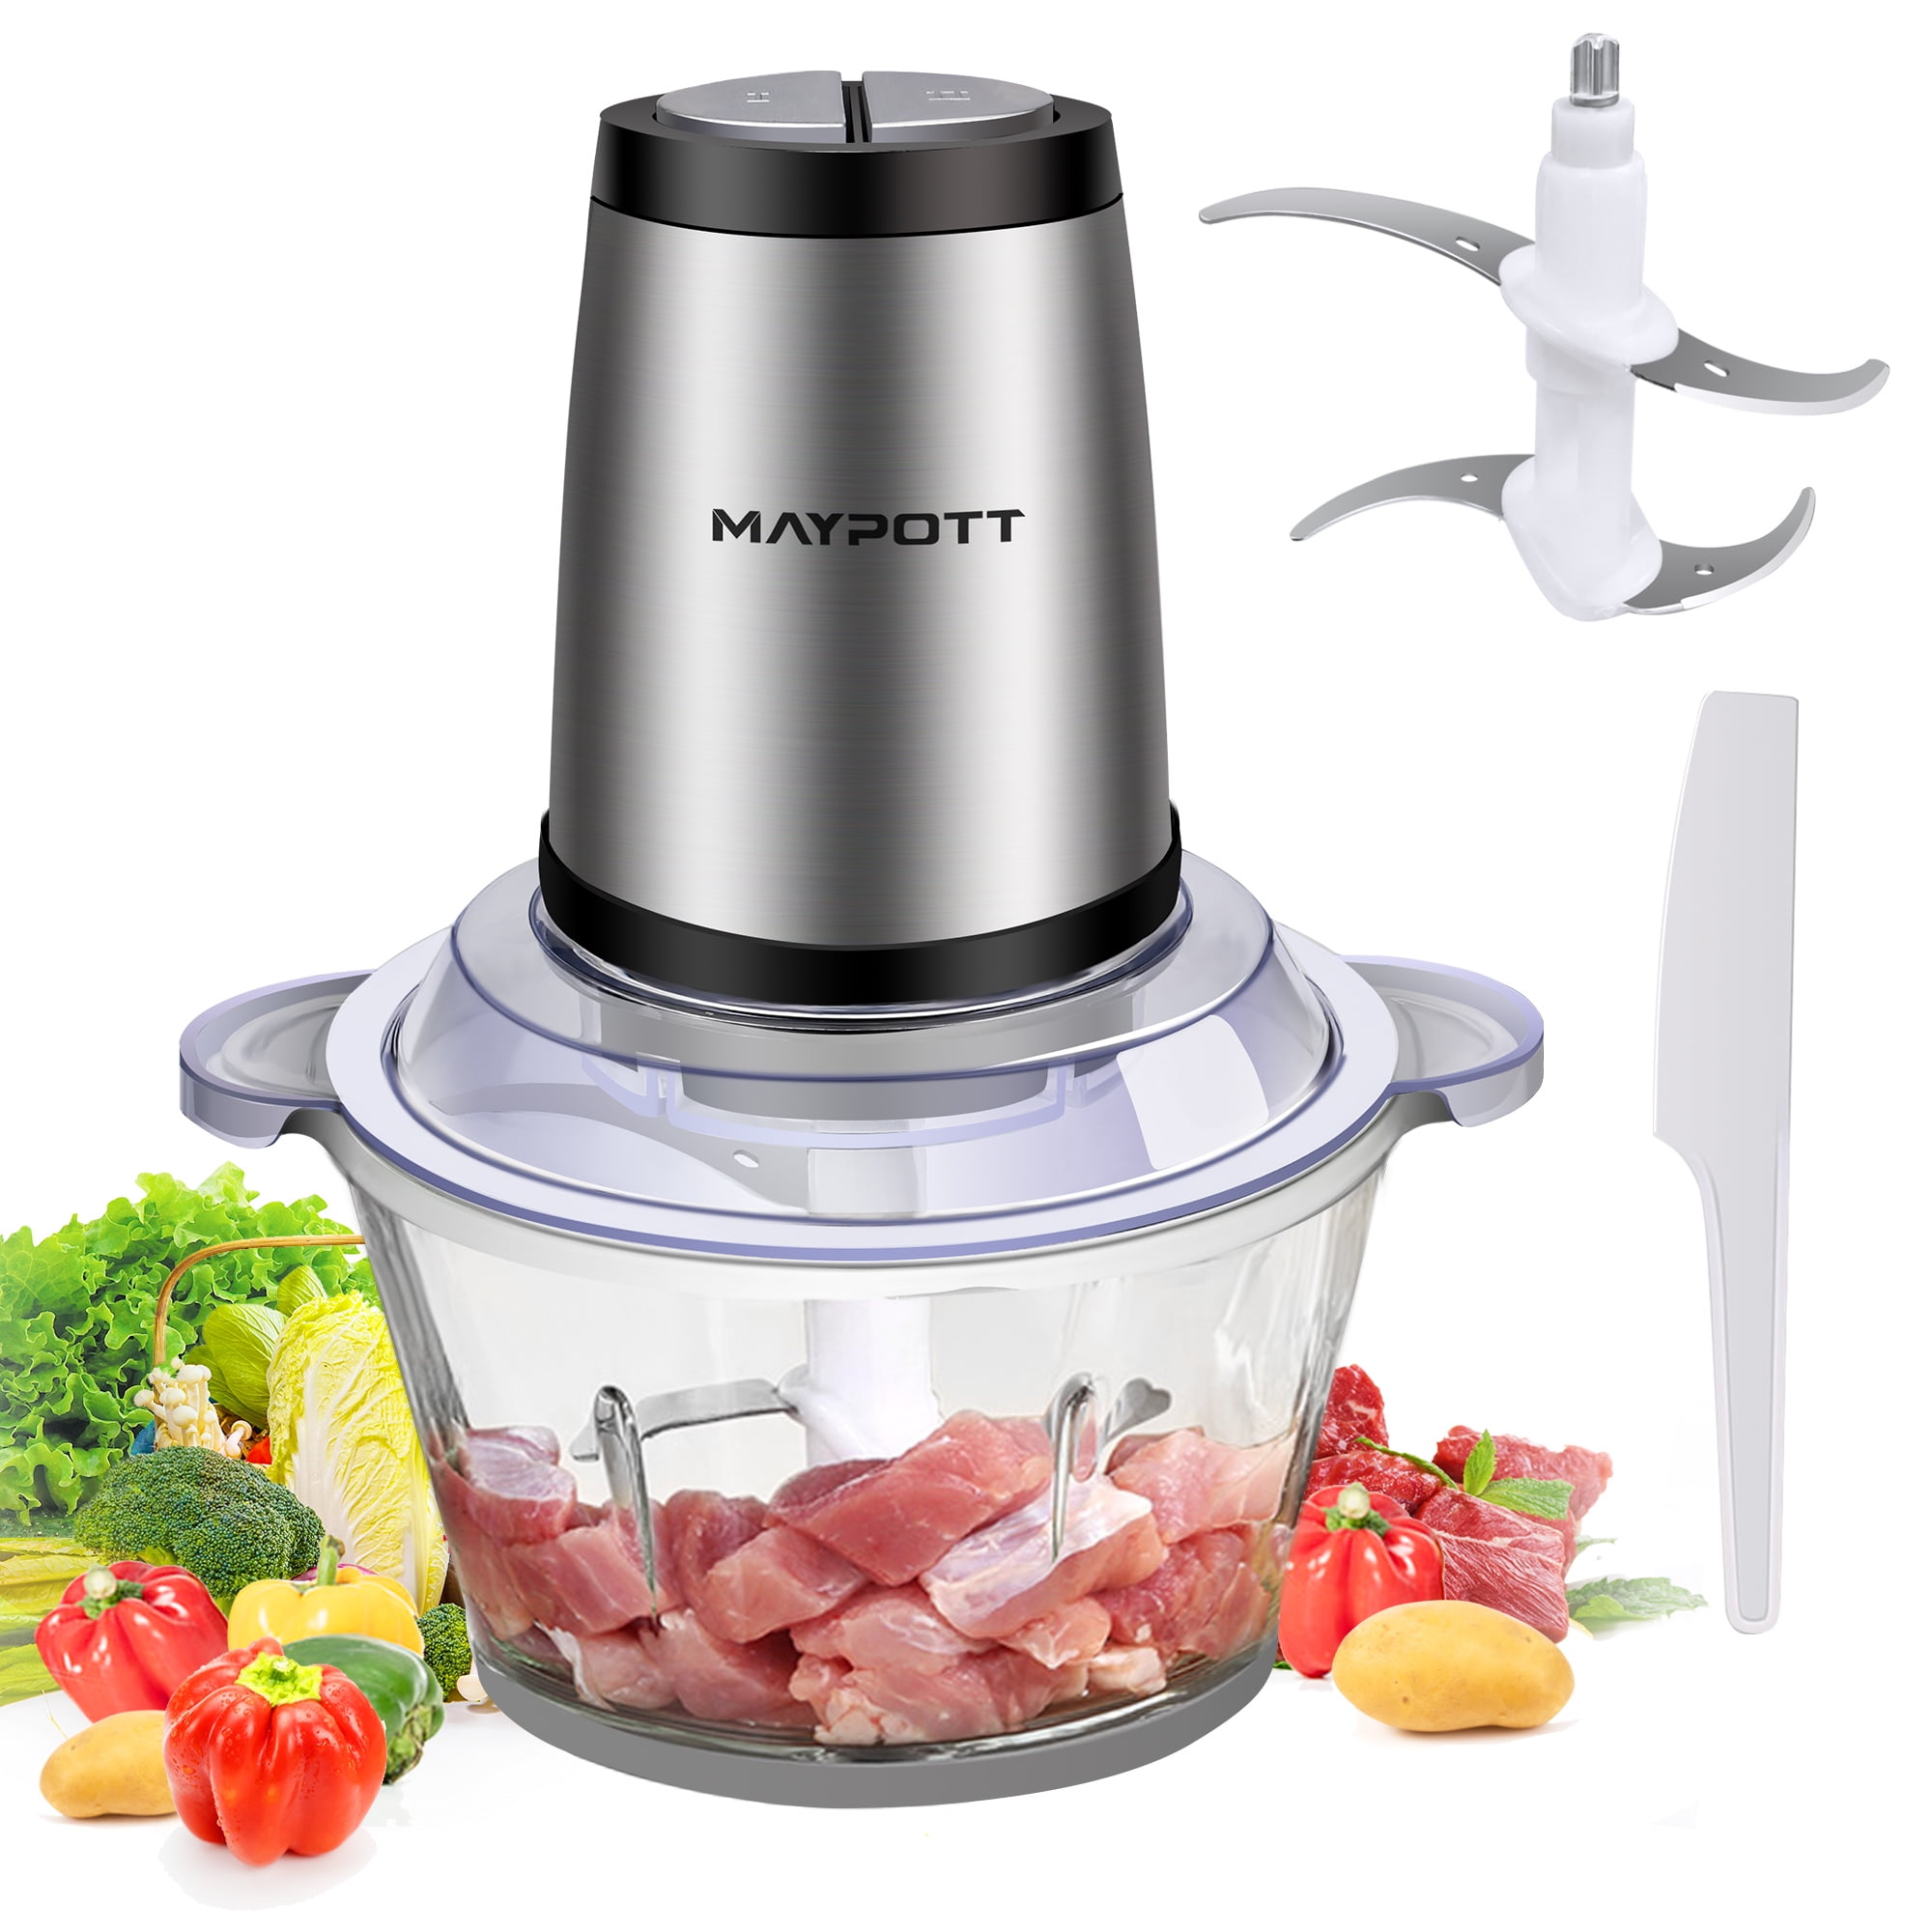  PULOYA Mini Food Processor 2 Cup Small Electric Food Chopper 2  Speed for Vegetables, Meat, Fruits and Nuts with 4 Stainless Steel Blades,  400-Watt, Red: Home & Kitchen